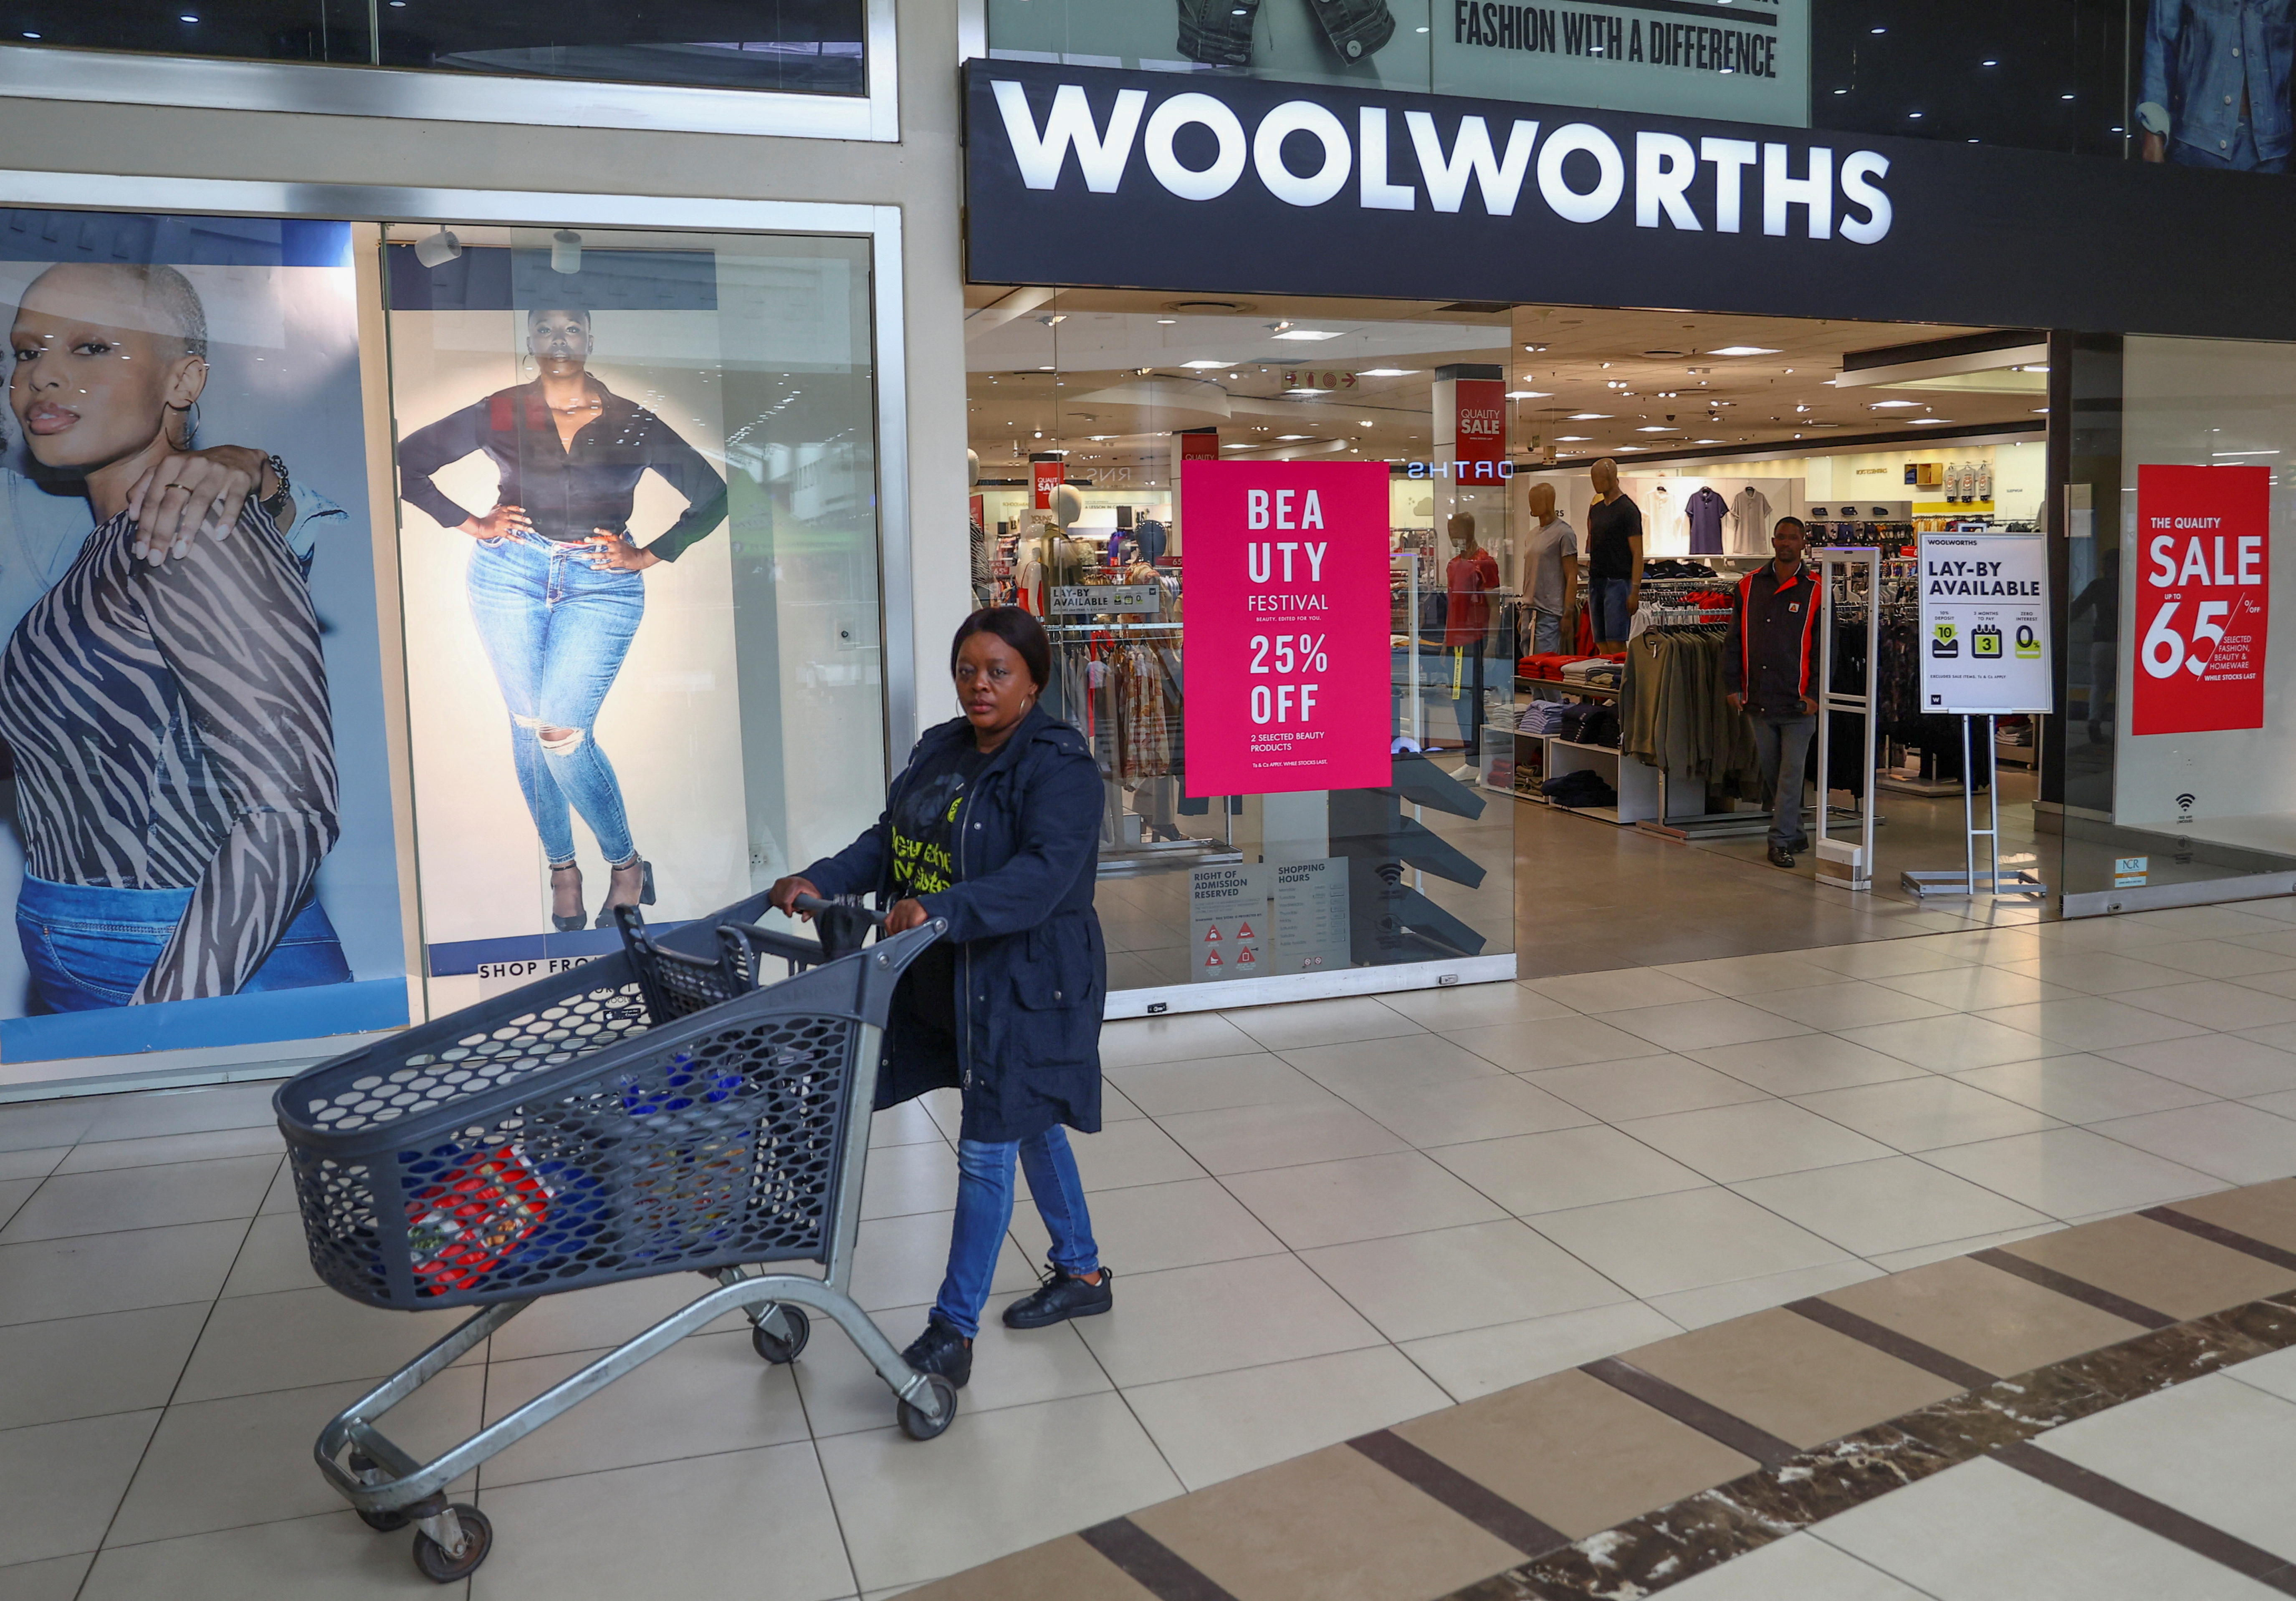 Woolworths announces closure of 30 Big W stores after slow profit